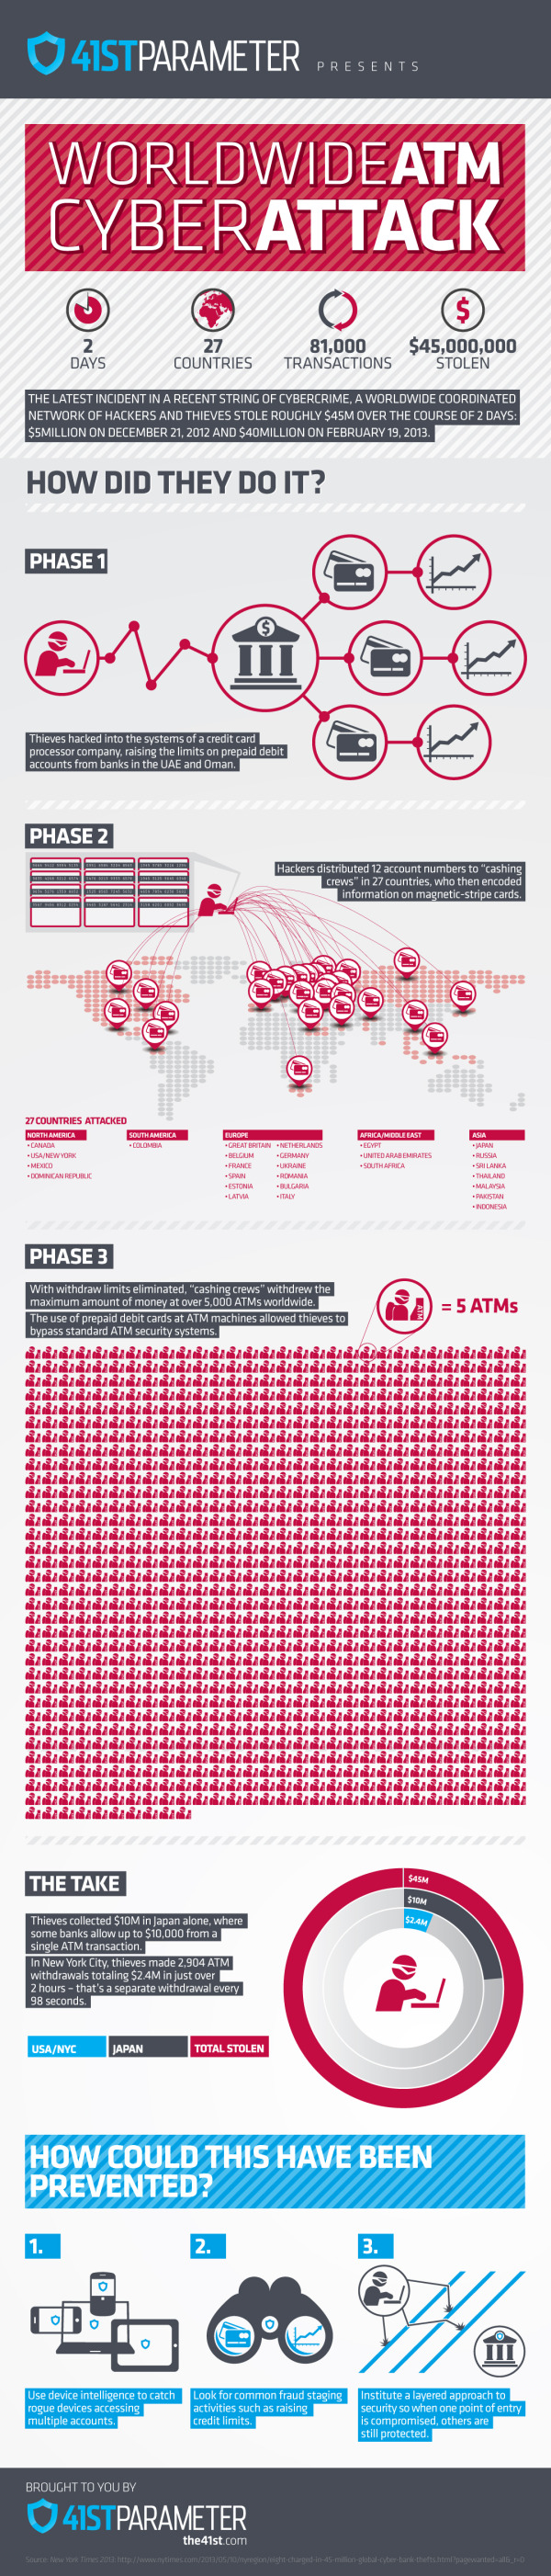 World Wide ATM Cyber Attack infographic